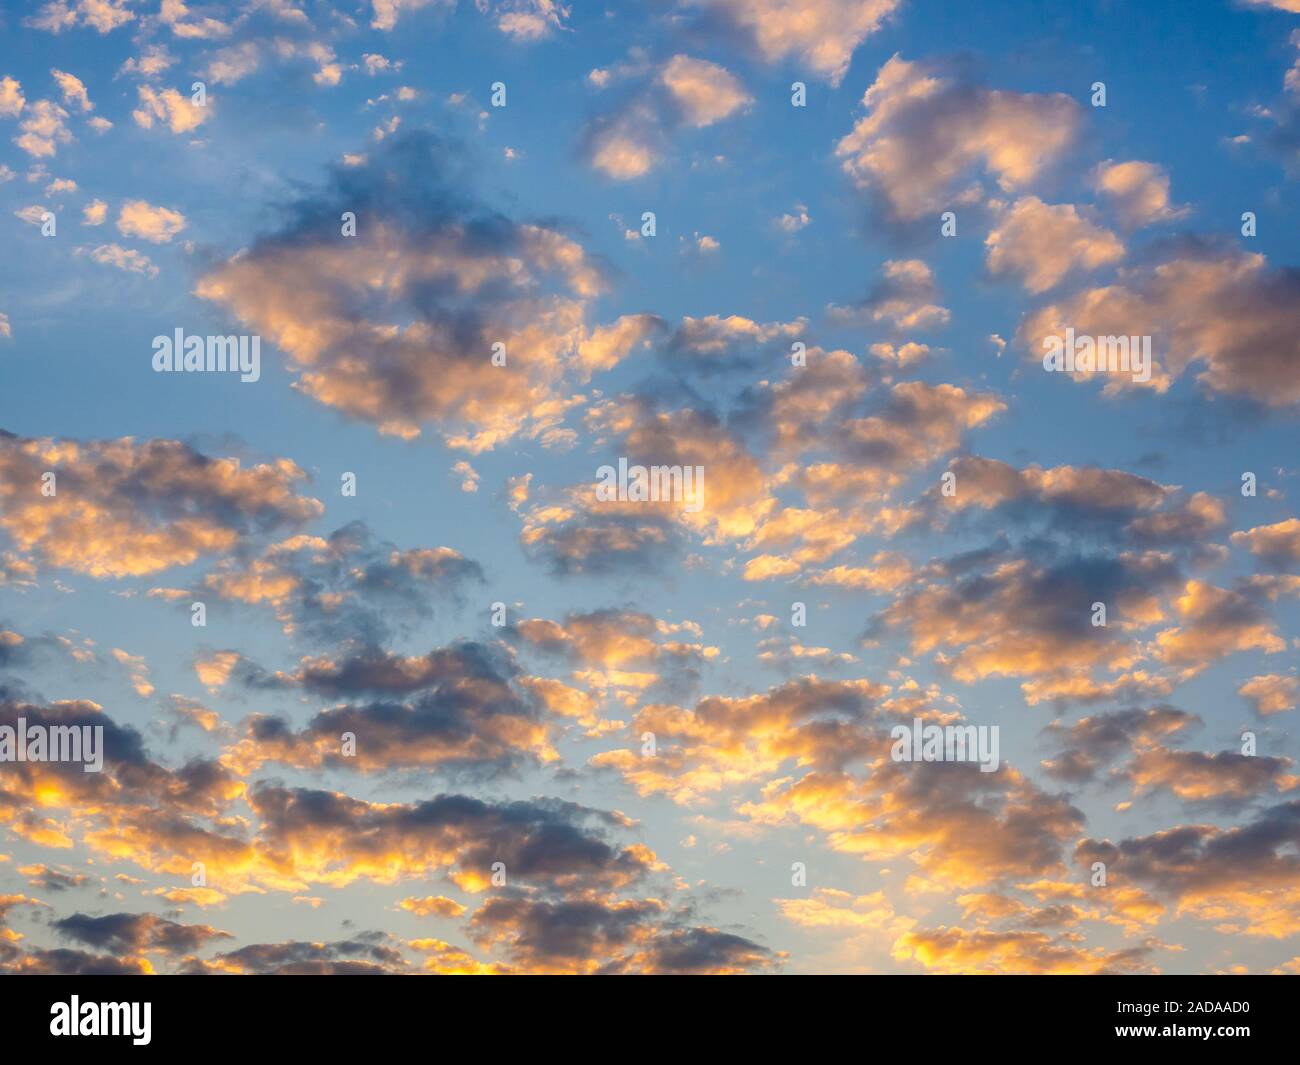 Beautiful golden clouds on sunset sky background. Blue sky background with golden light from sunlight shining on the clouds. Stock Photo